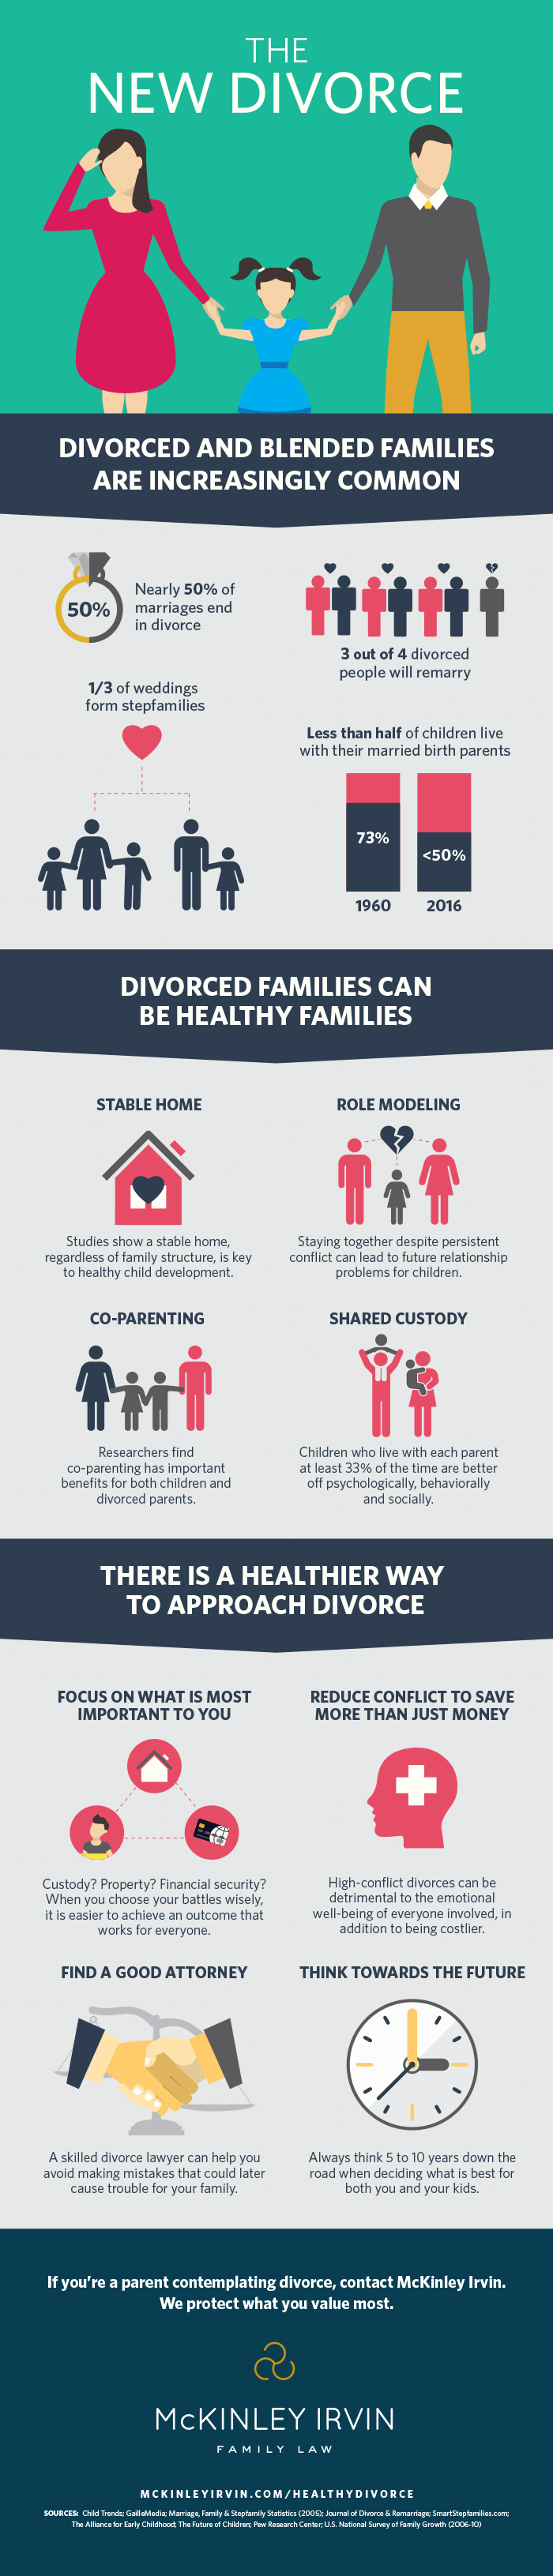 Can Divorced Families be Healthy Families? [Infographic]